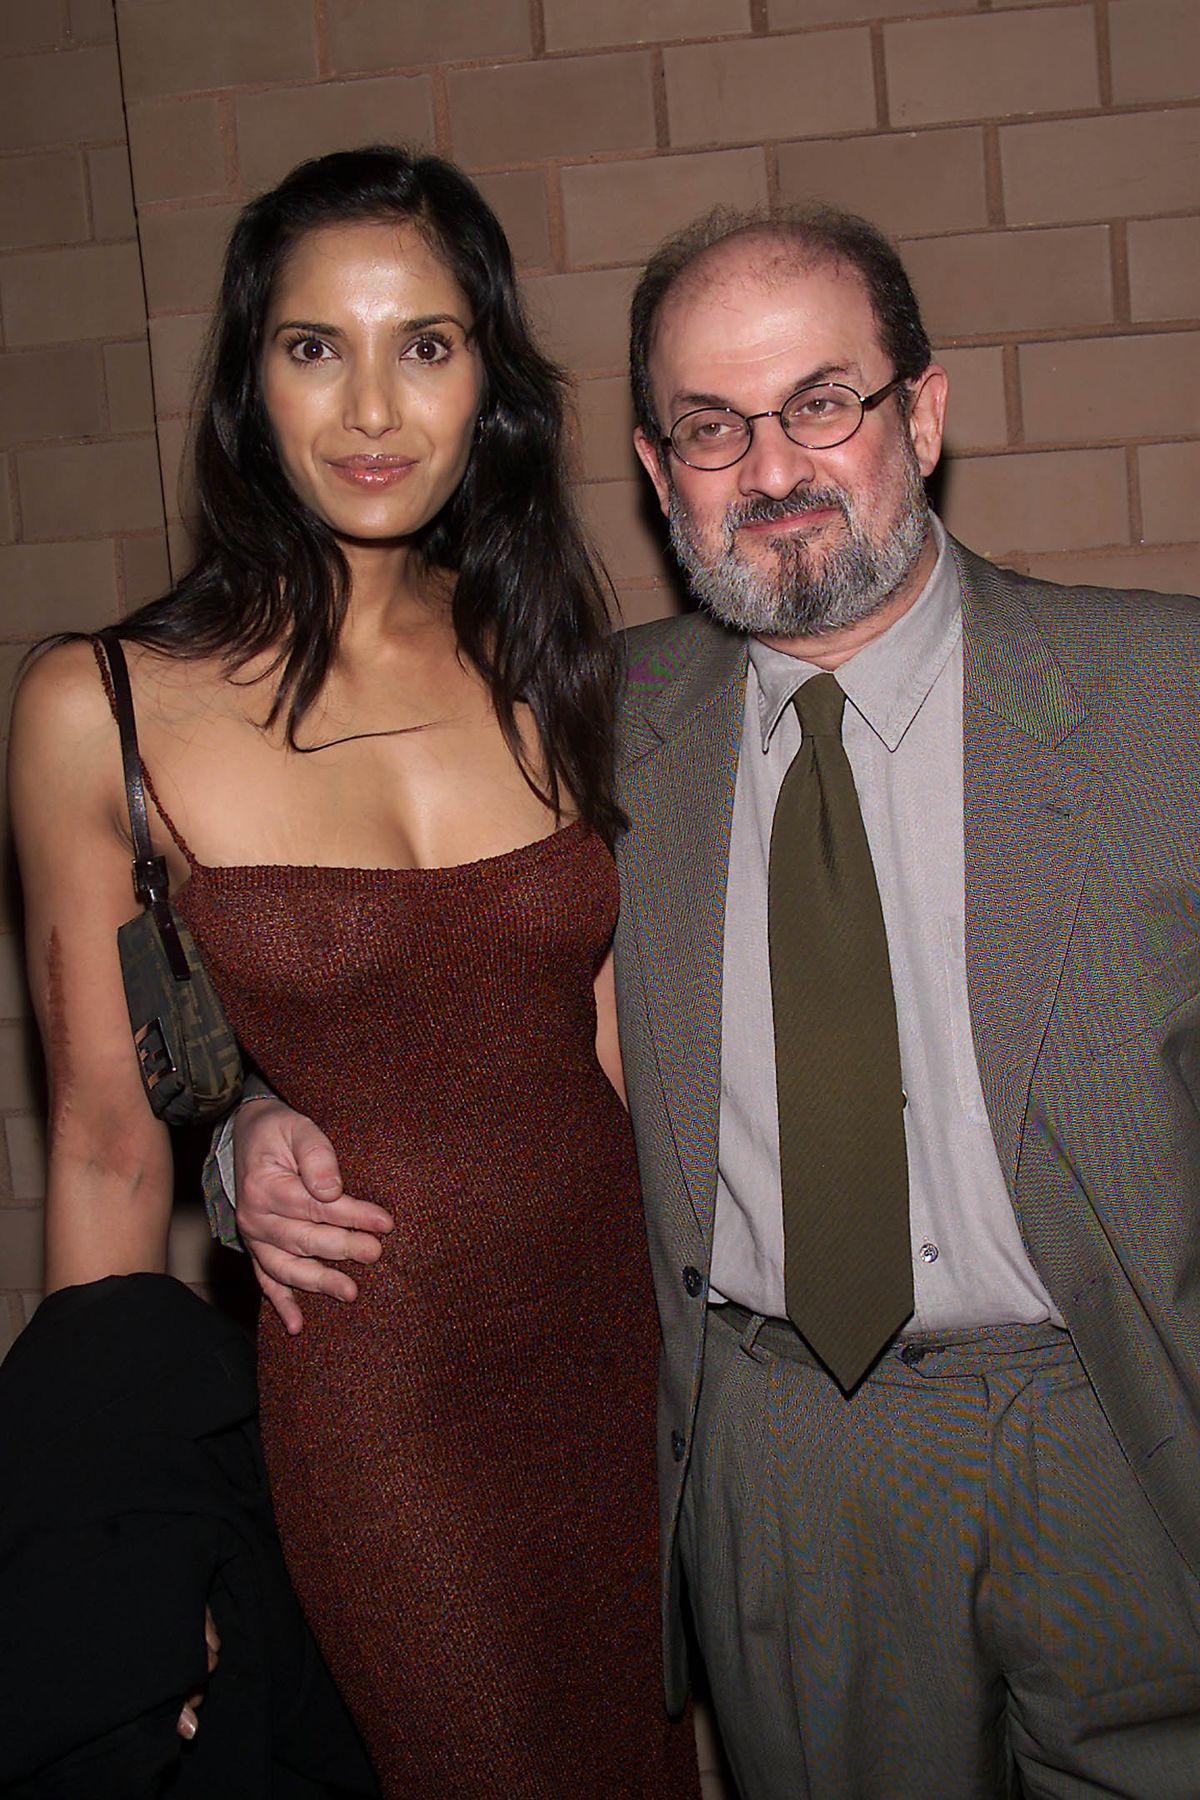 Padma Lakshmi and Salman Rushdie attend a pre-screening party before the New York premiere of The Lord of the Rings: The Fellowship of the Ring